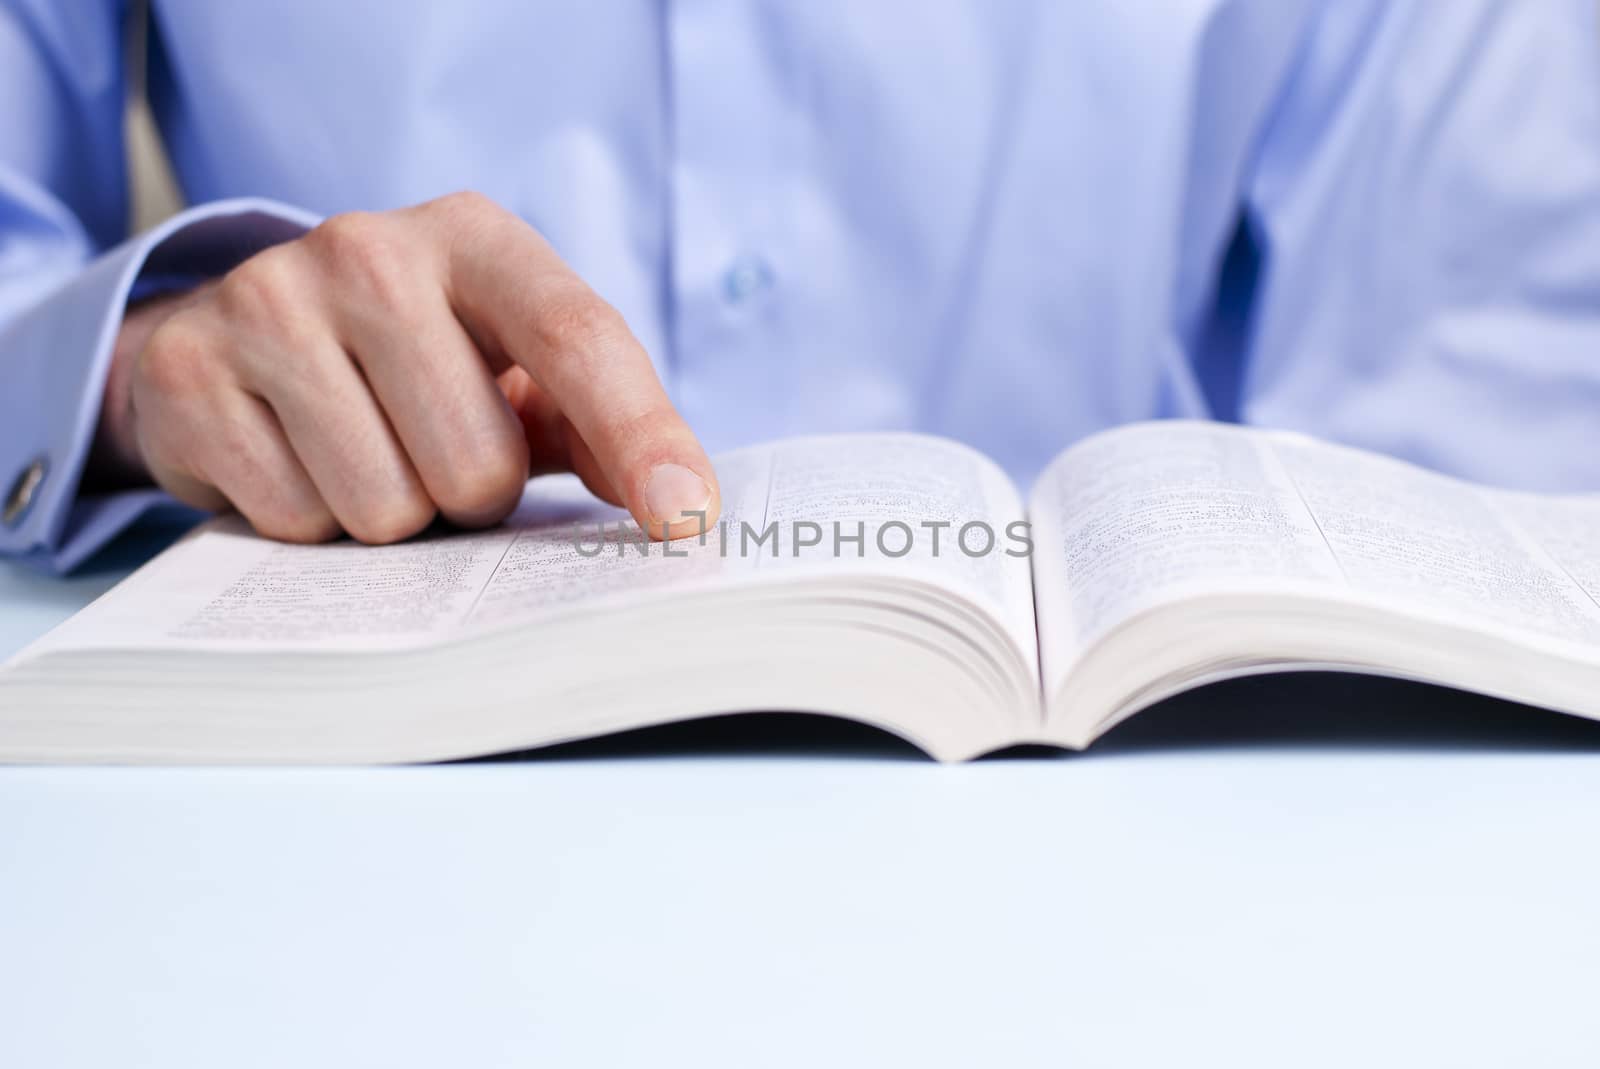 man reading a book, shows a close-up hand and a book